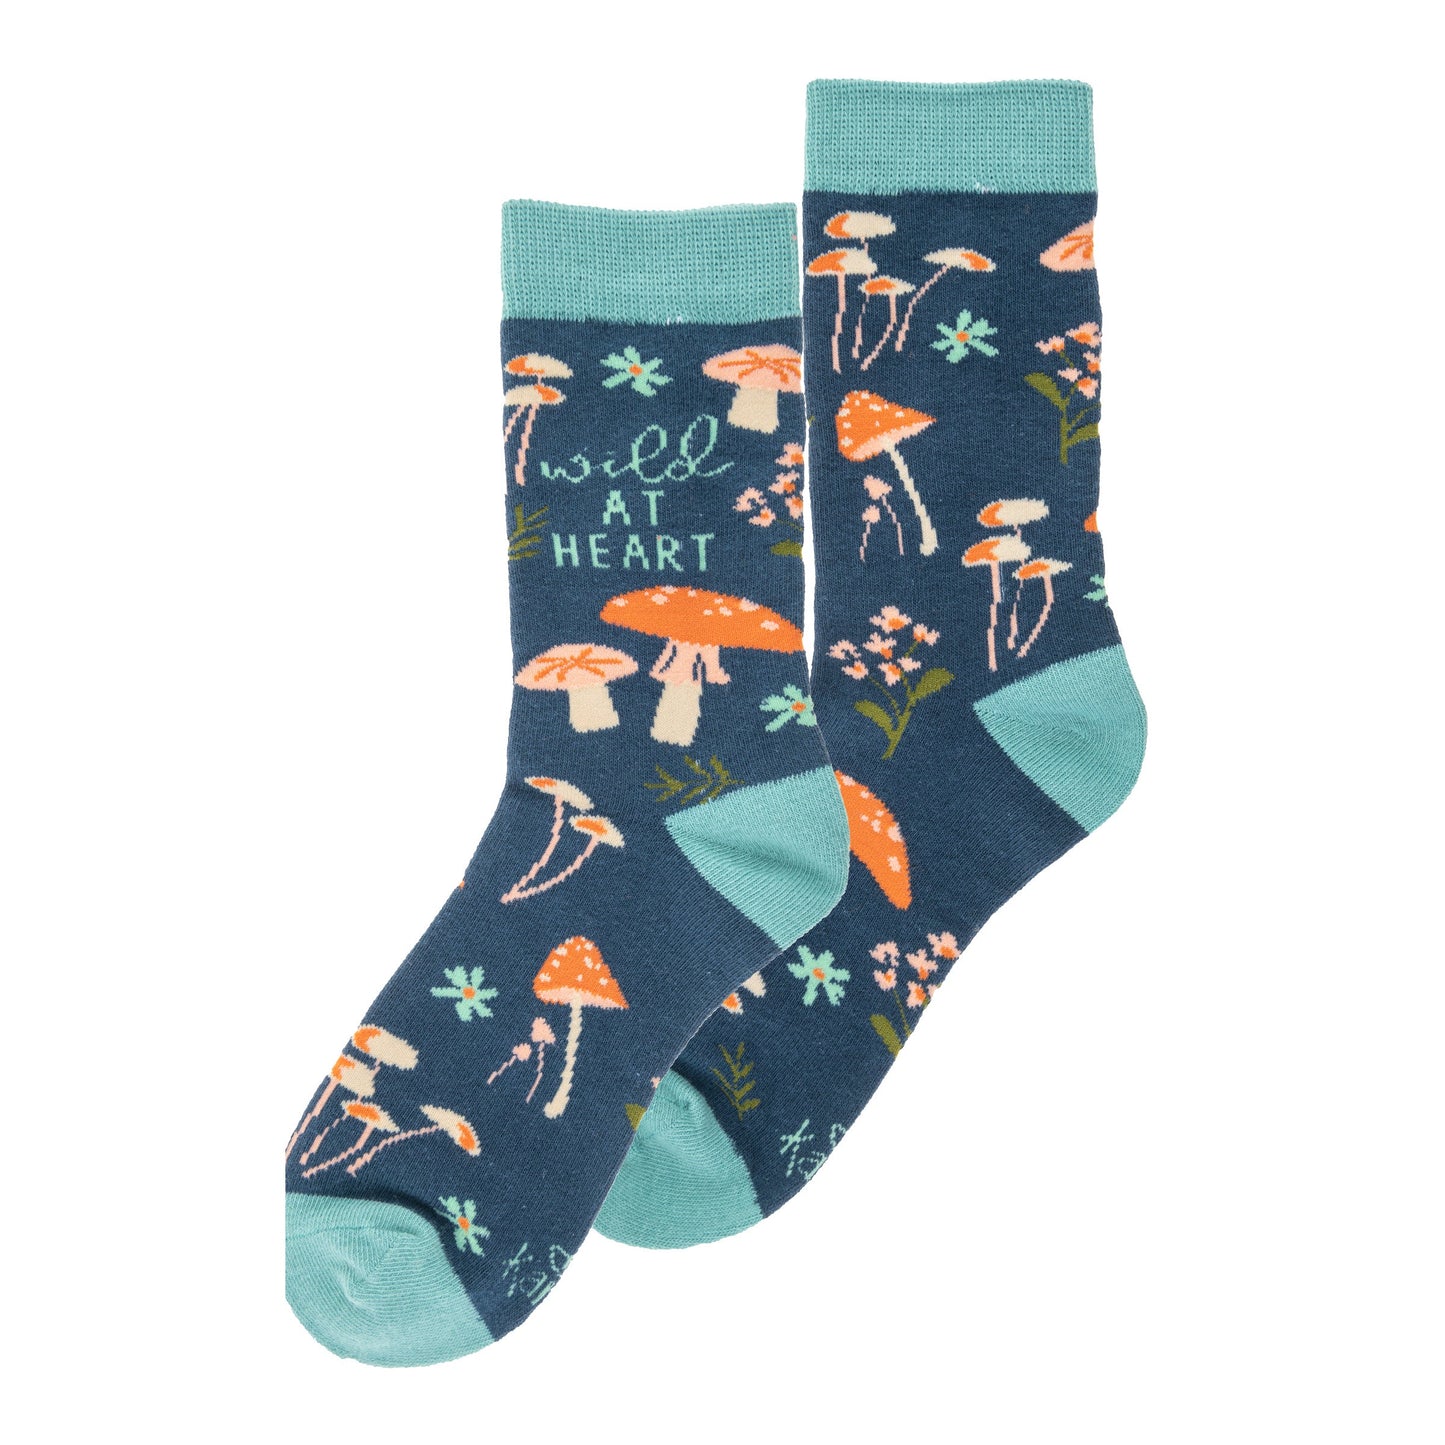 teal socks with mushroom pattern and "wild at heart" on it.